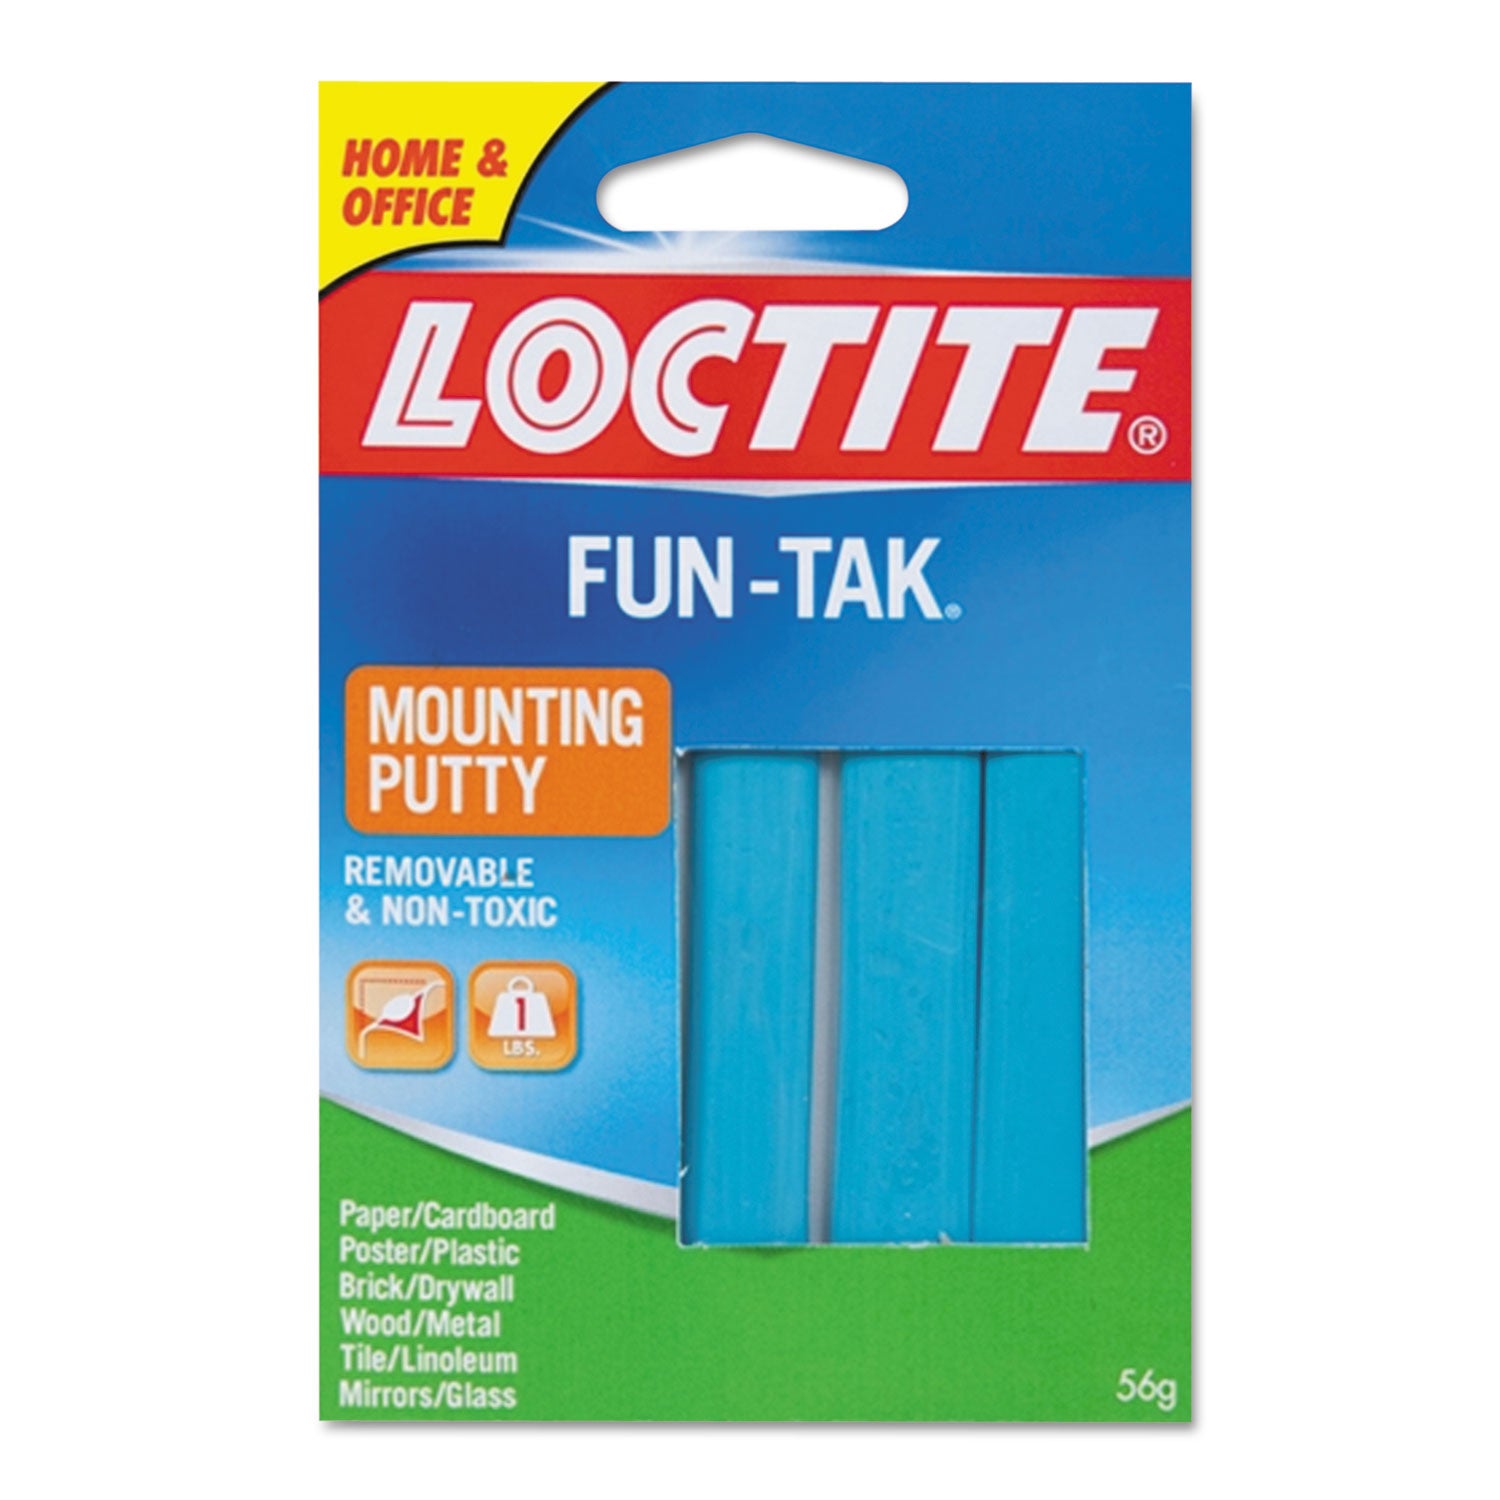 Fun-Tak Mounting Putty, Repositionable and Reusable, 6 Strips, 2 oz - 